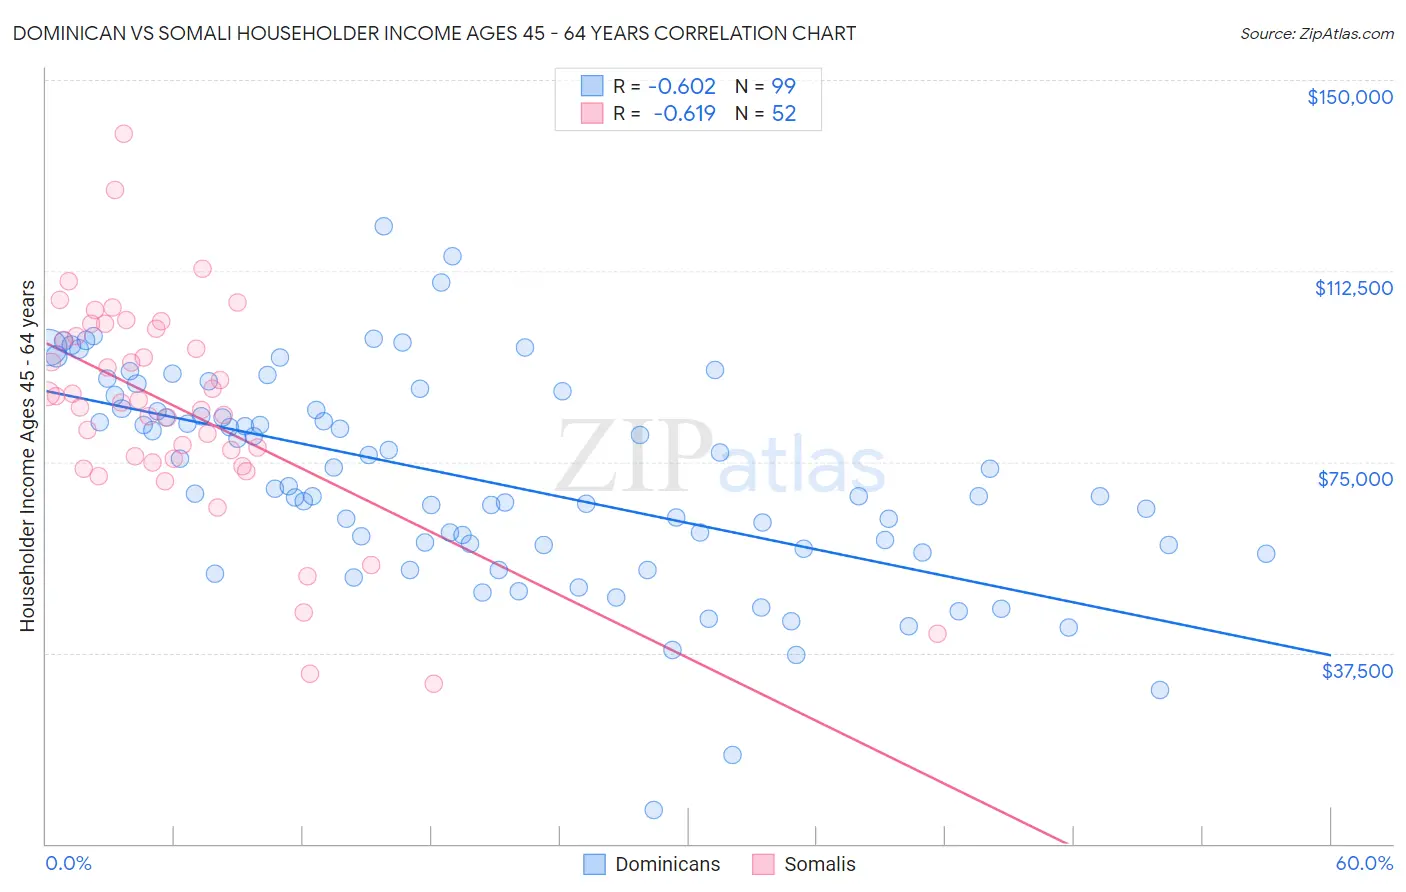 Dominican vs Somali Householder Income Ages 45 - 64 years